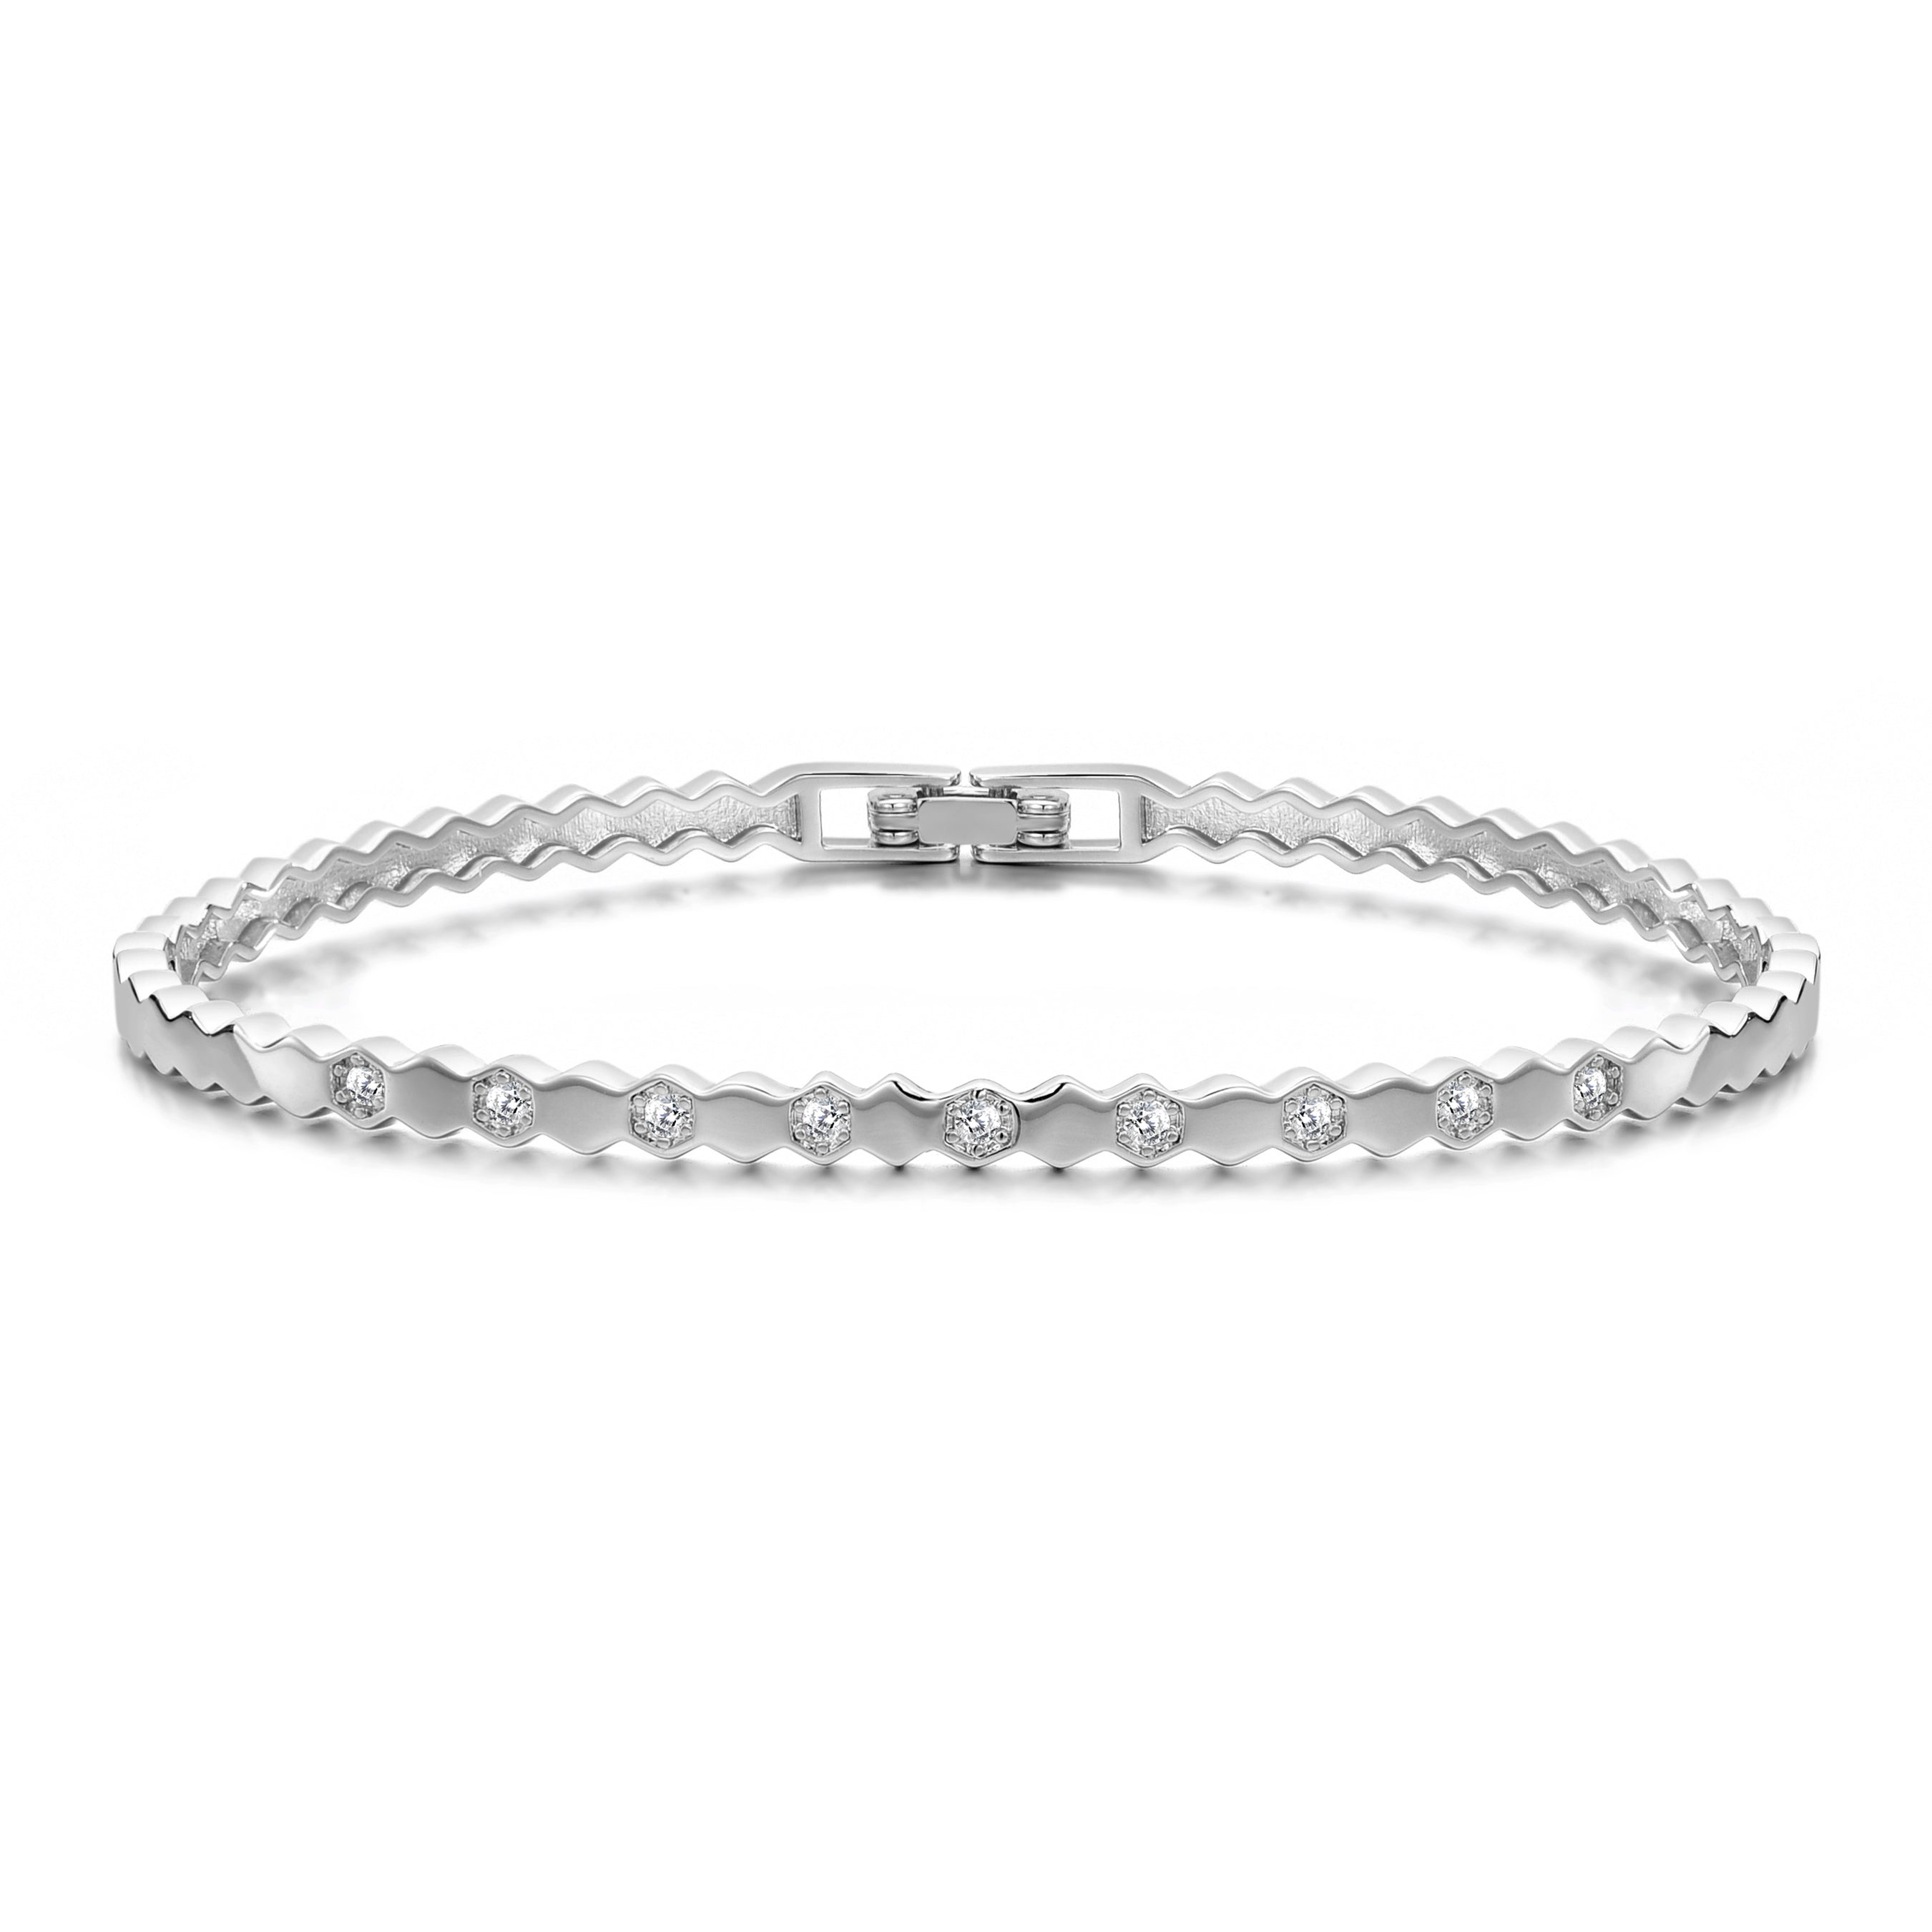 Silver Plated Honeycomb Bangle Created with Zircondia® Crystals by Philip Jones Jewellery